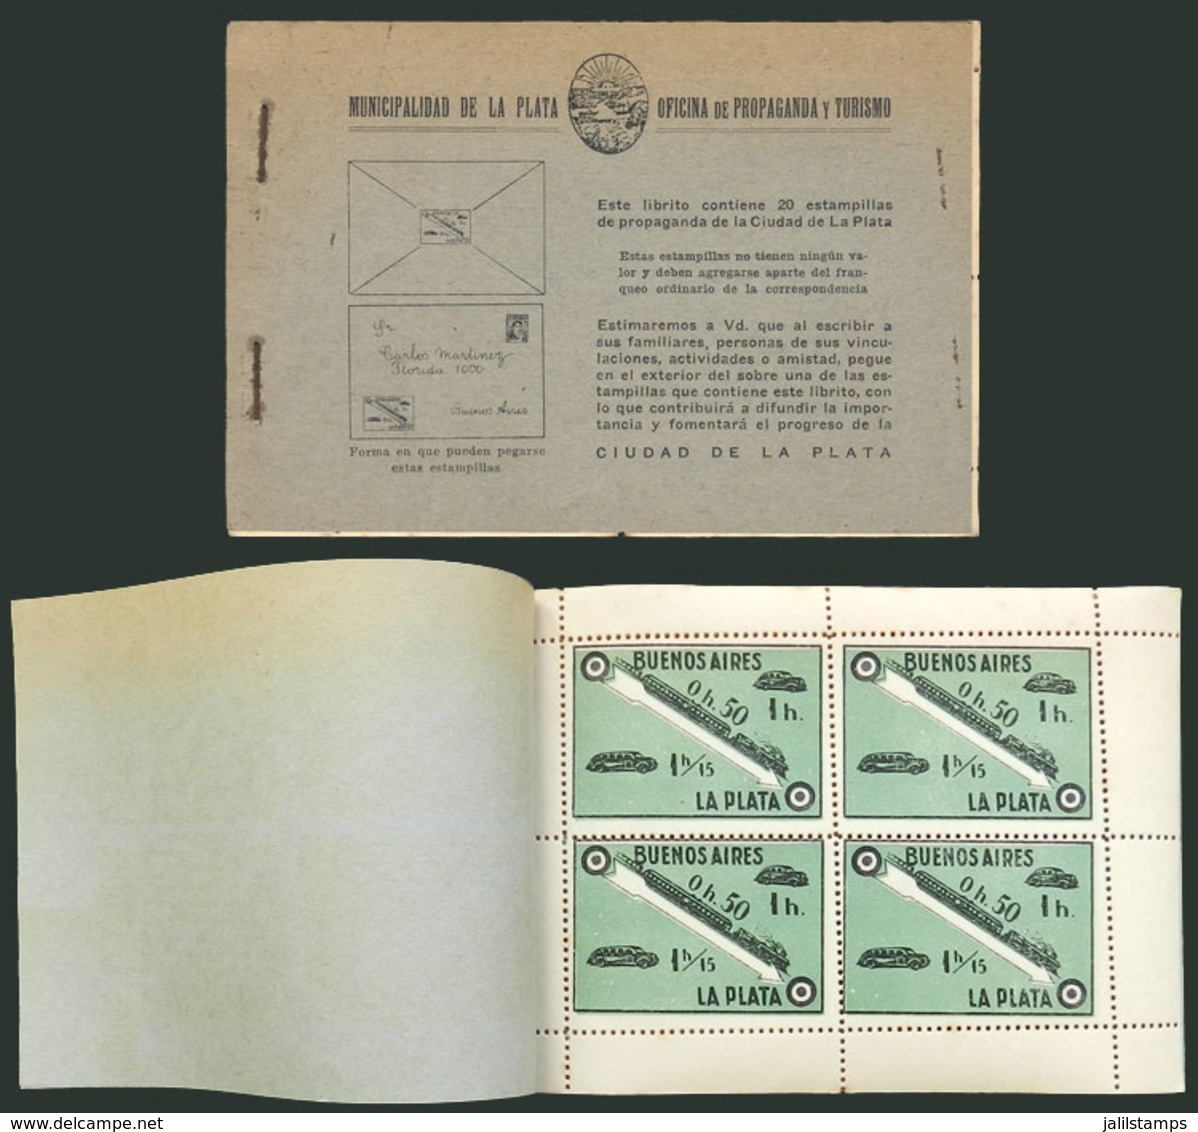 ARGENTINA: Municipality Of La Plata, COMPLETE BOOKLET Of 20 Cinderellas Indicating The Travelling Times Between Buenos A - Cinderellas